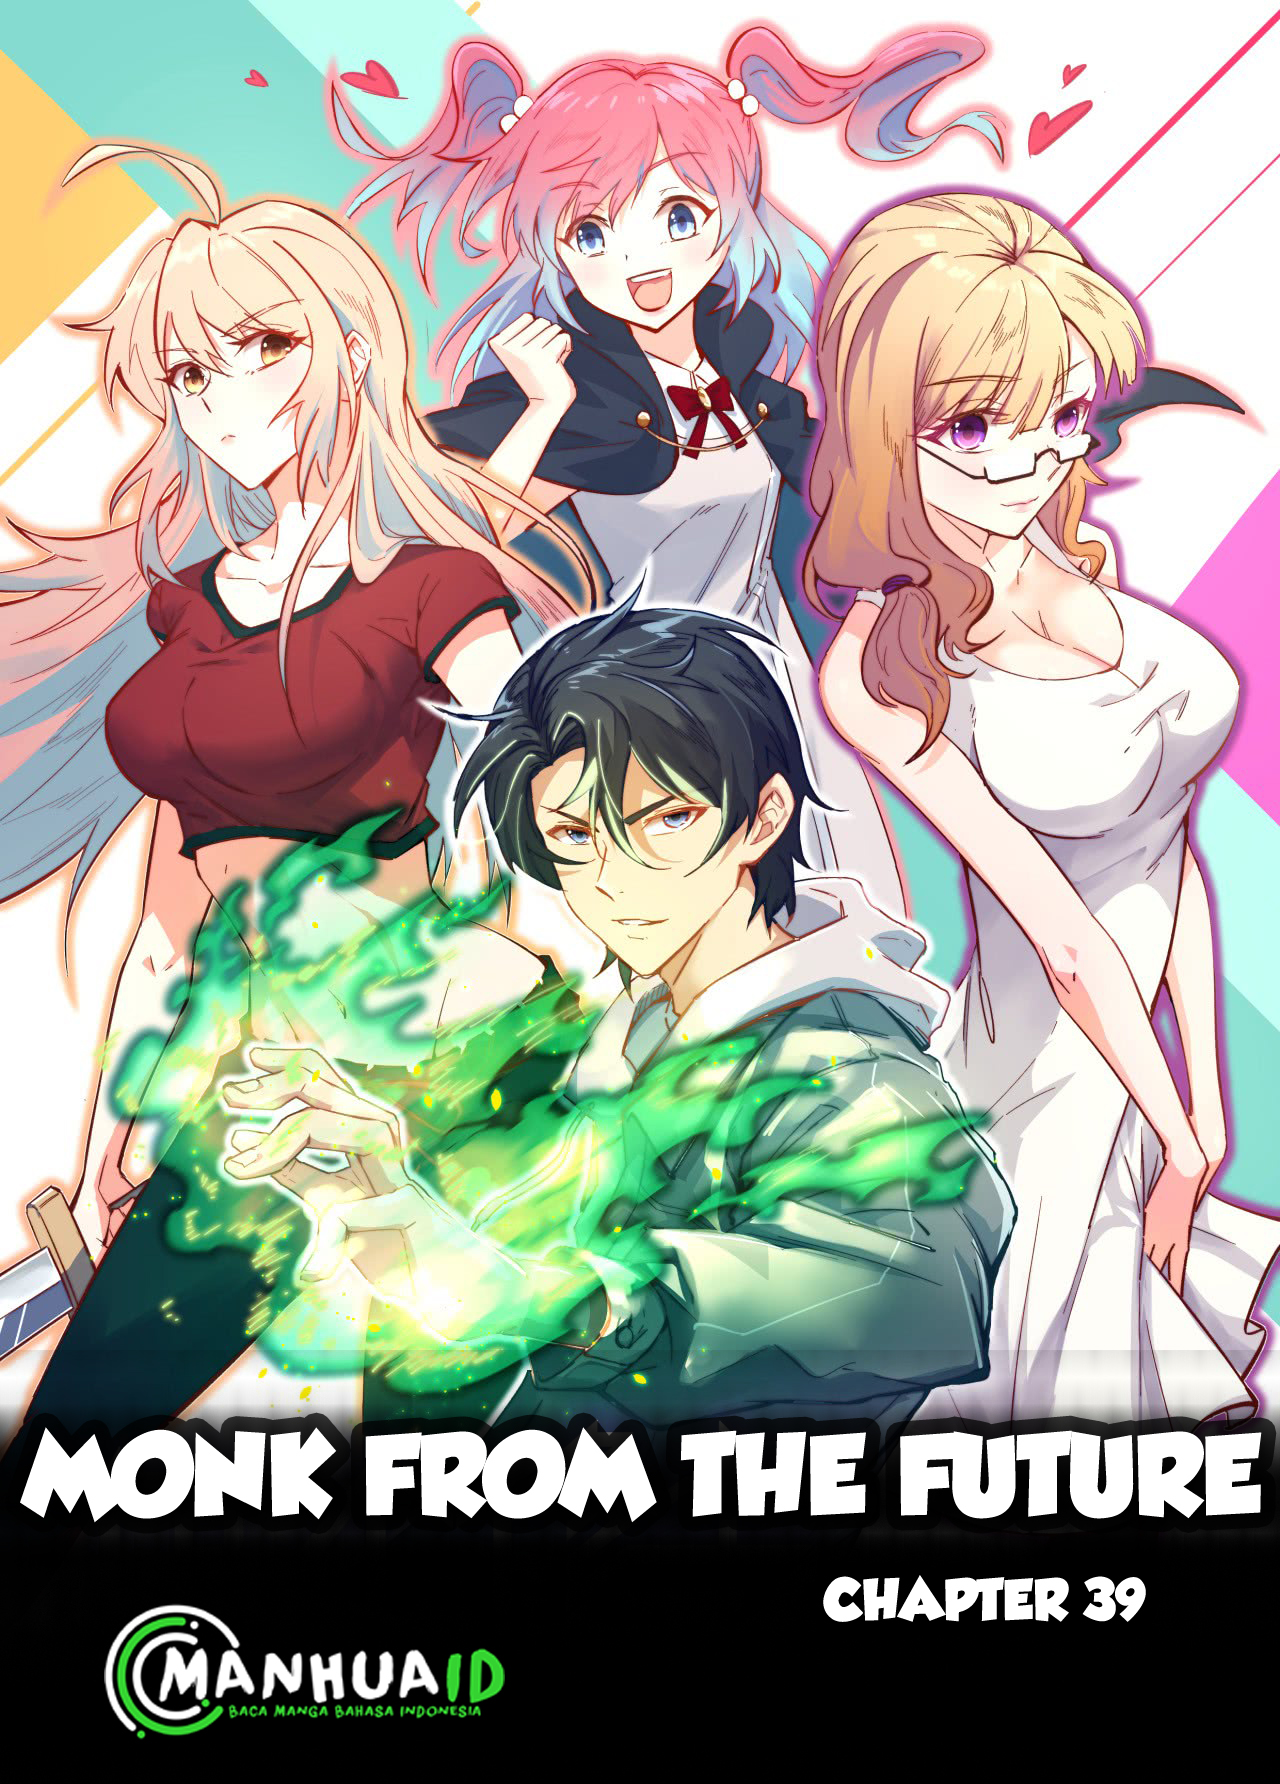 Monk From the Future Chapter 39